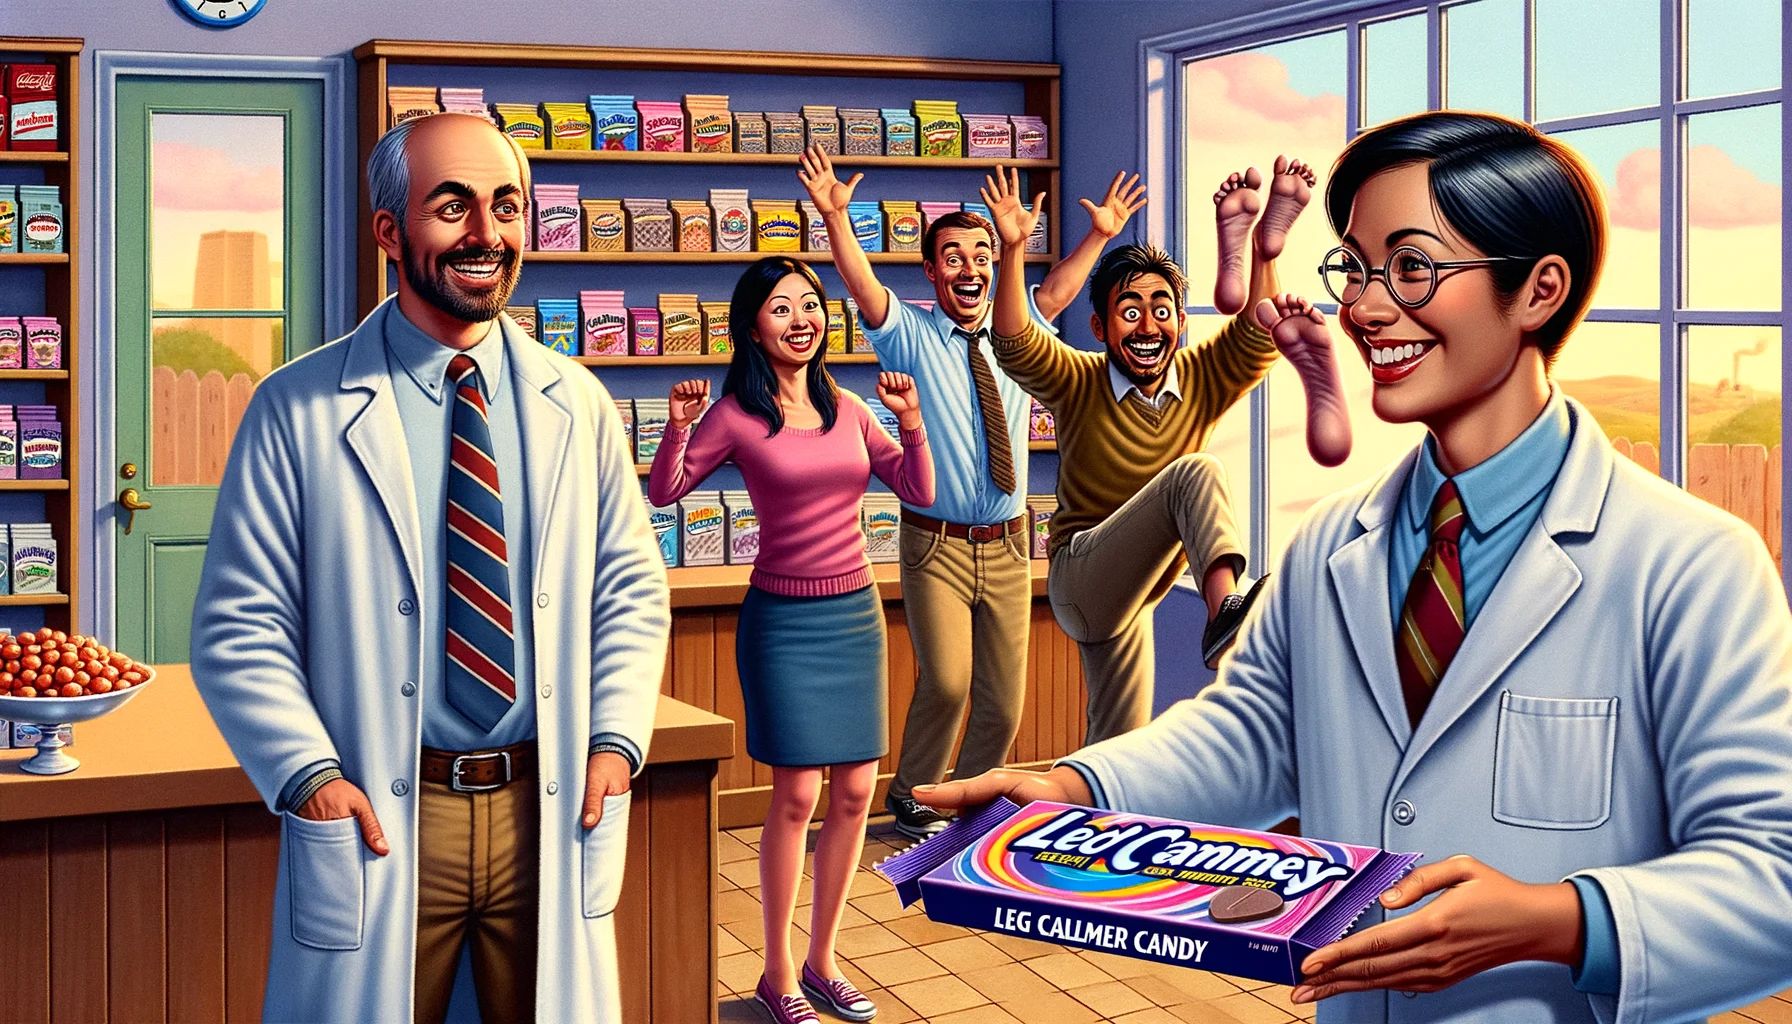 A delightfully humorous image depicting a humorous yet appropriate situation. Imagine a cozy pharmacy with shelves stacked with a variety of candies. In the foreground, a Caucasian male pharmacist is handing out candy to a South Asian woman, while a cheerful Hispanic man and a Middle-Eastern girl standing behind in line with a hopeful expression. The candy packaging labelled with a playful, bold title 'Leg Calmer Candy'. However, in a gentle comedic twist to the scene, we see a vigorous pair of cartoon legs leaping out from logo illustrating the concept of 'Restless Leg Syndrome'.